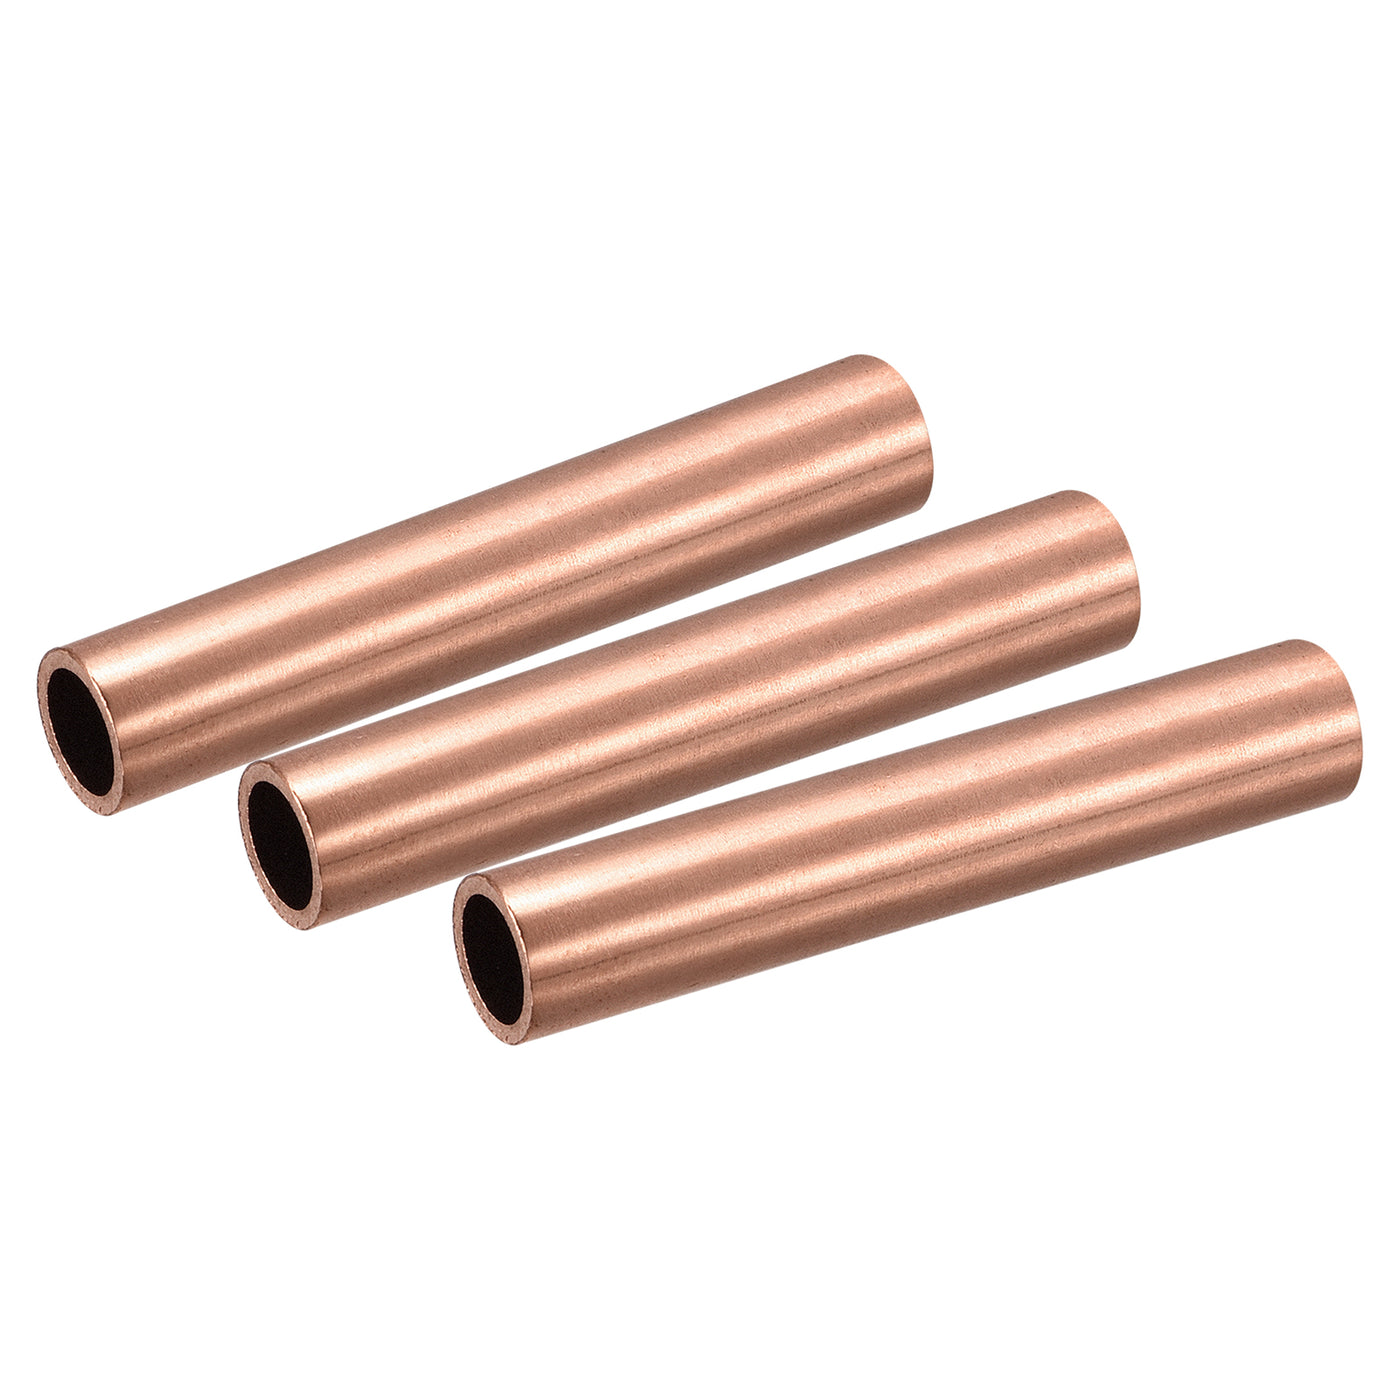 uxcell Uxcell Copper Round Tube 15mm OD 1.5mm Wall Thickness 100mm Length Pipe Tubing 3 Pcs